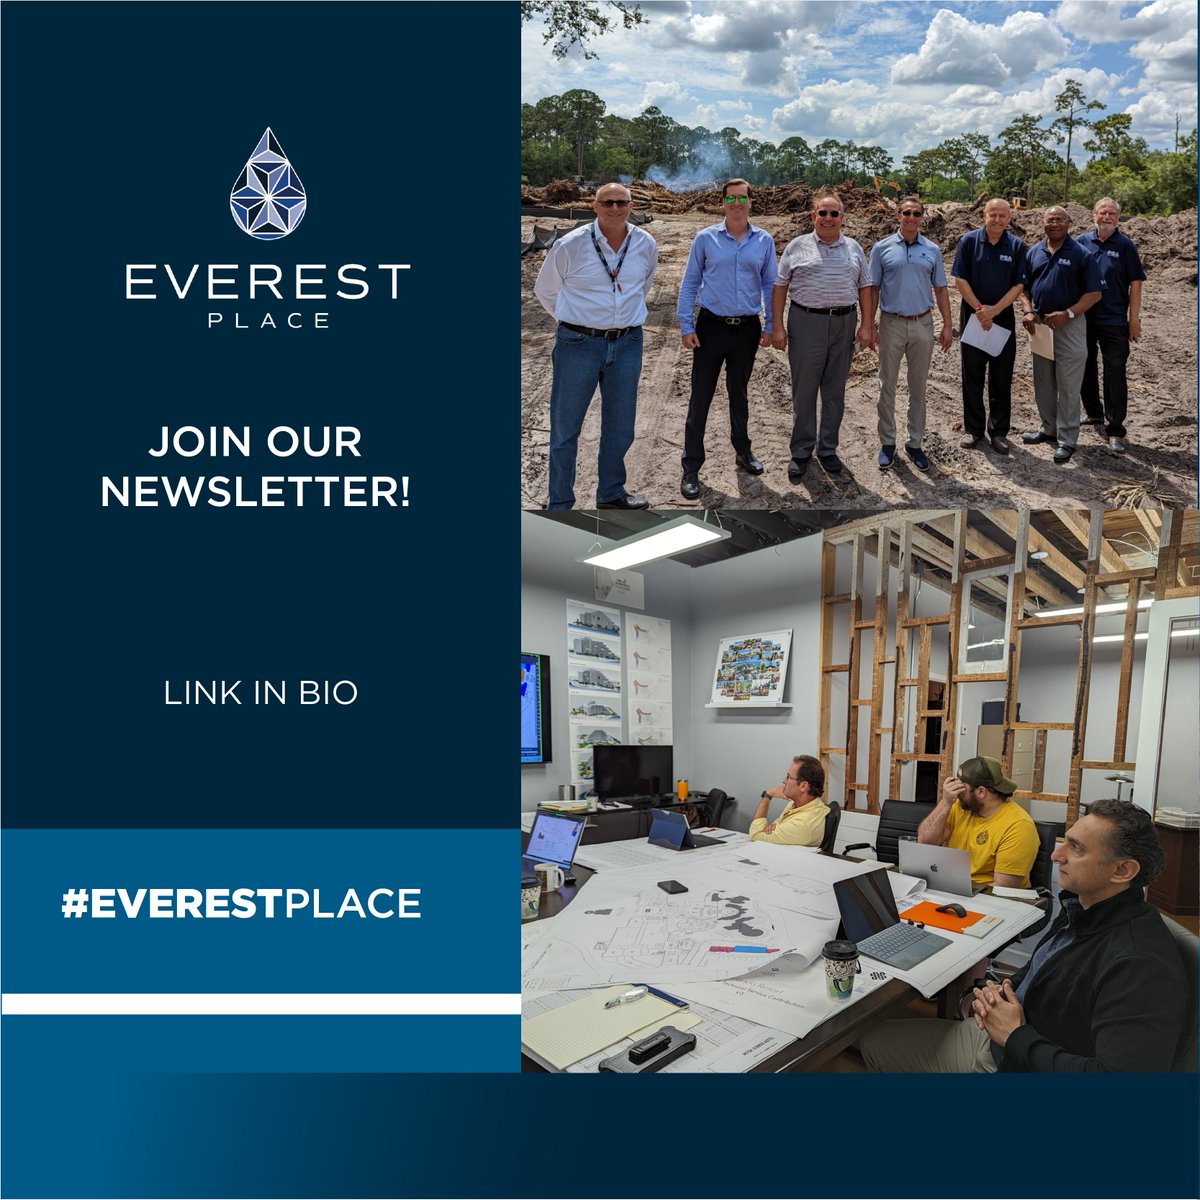 Be the first to know any updates for the #EverestPlace project. Join our mailing list!... Link in Bio.
#landdevelopment #everestgroupofcompanies #orlando #florida #vacationhomes #incomeproducing #realestate #investment